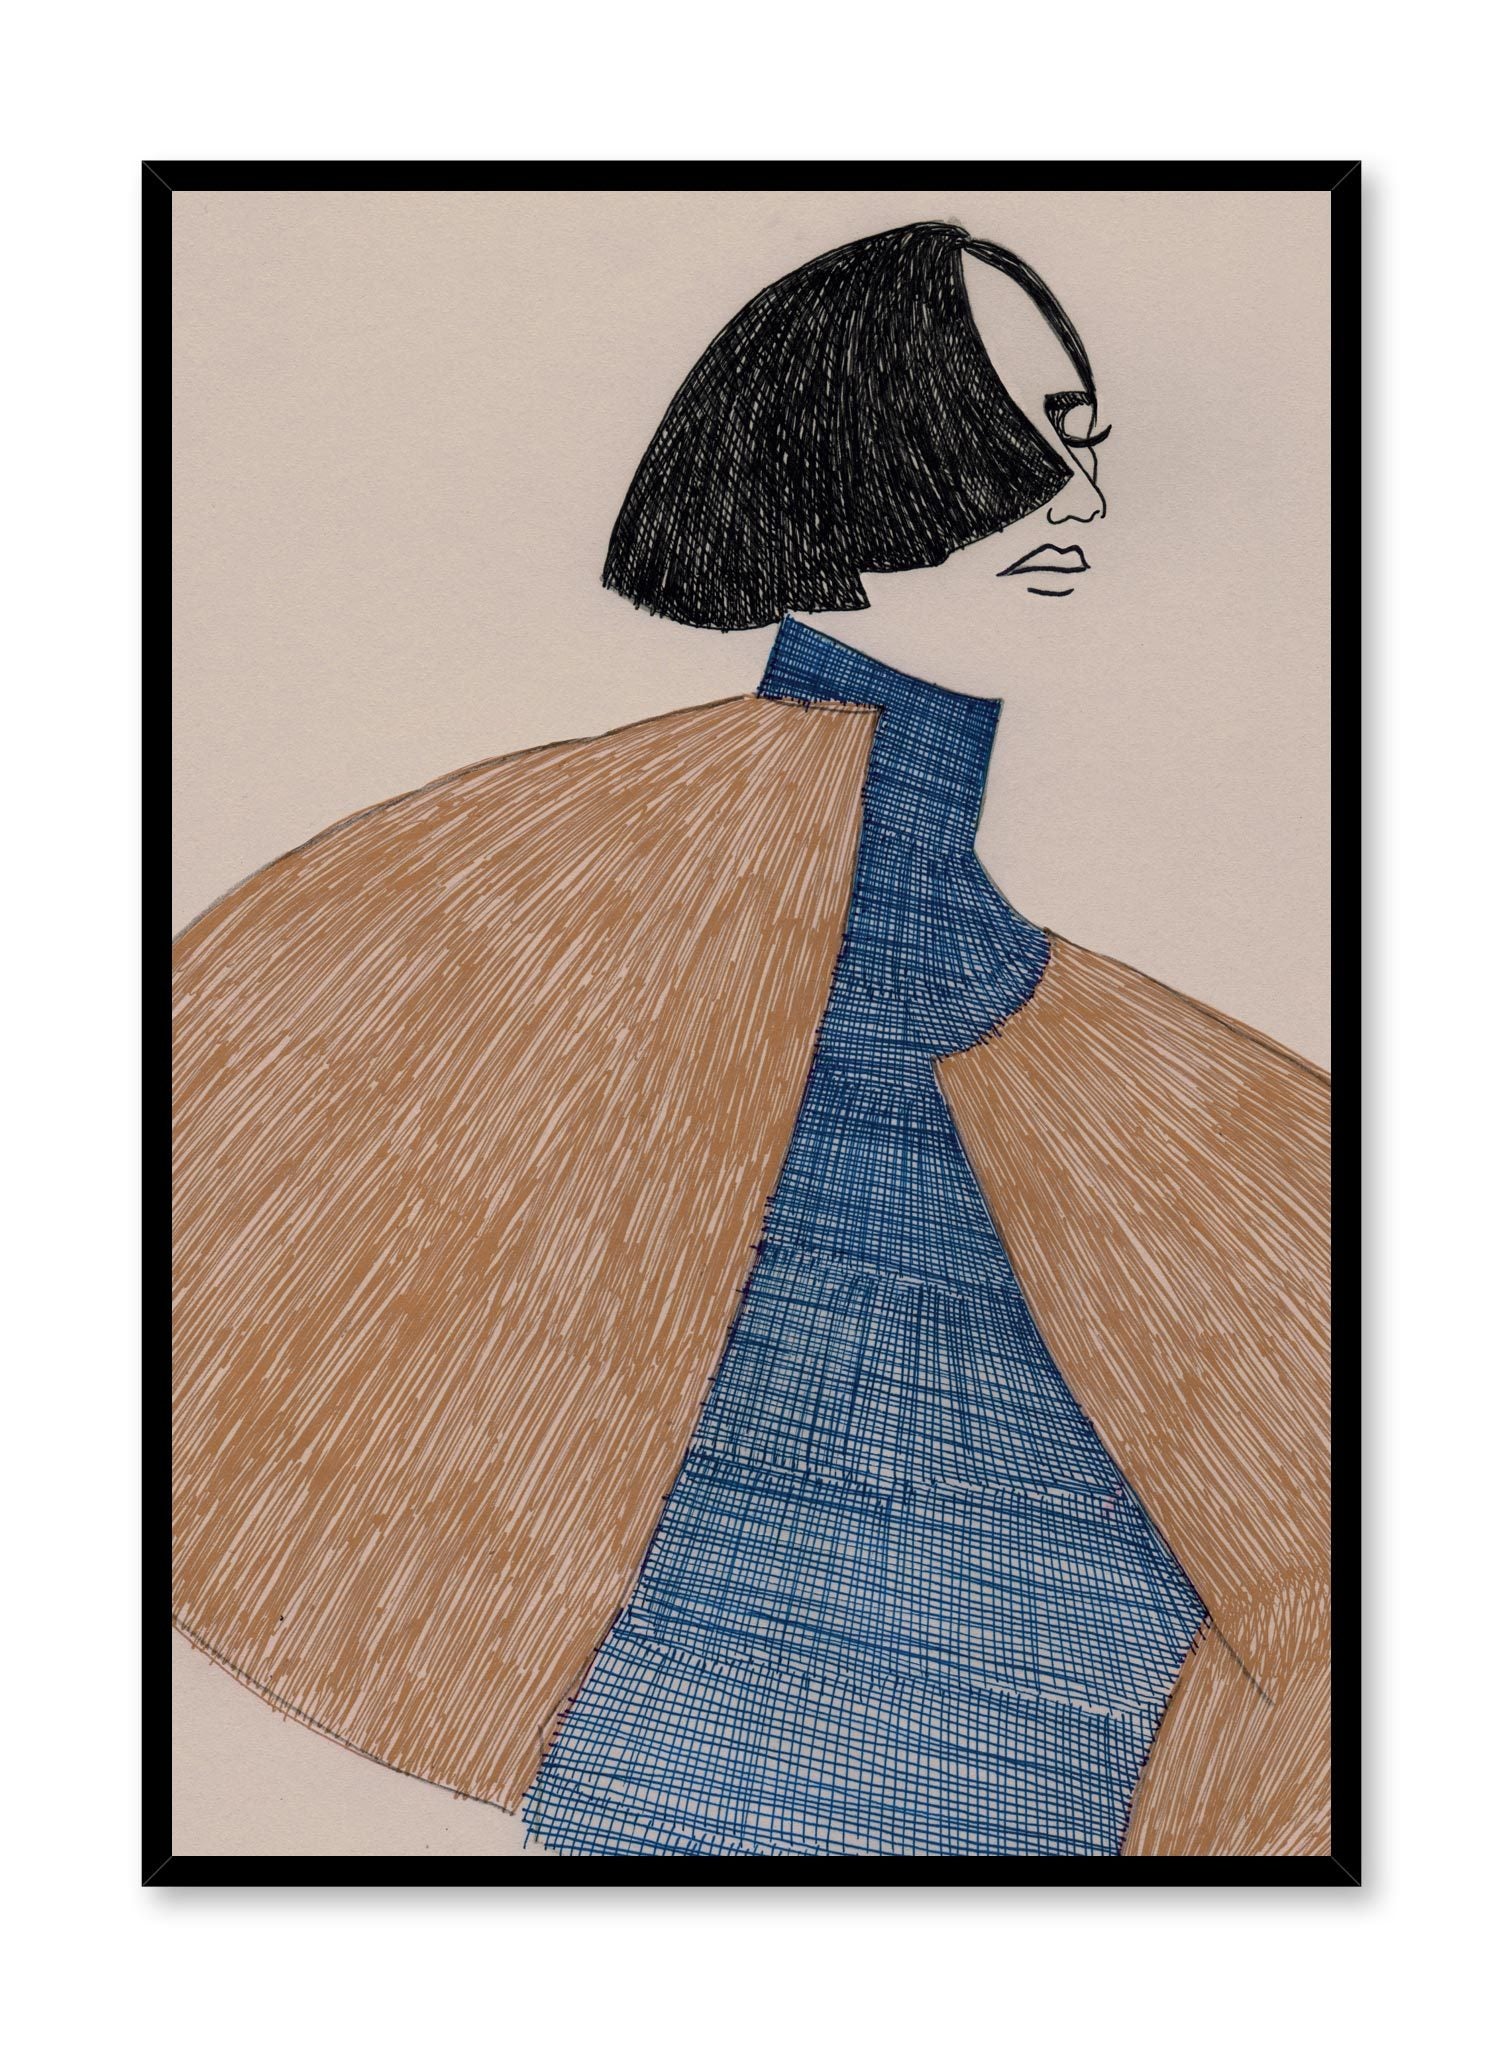 Fashion illustration poster by Opposite Wall with androgynous fashion in ballpoint pen